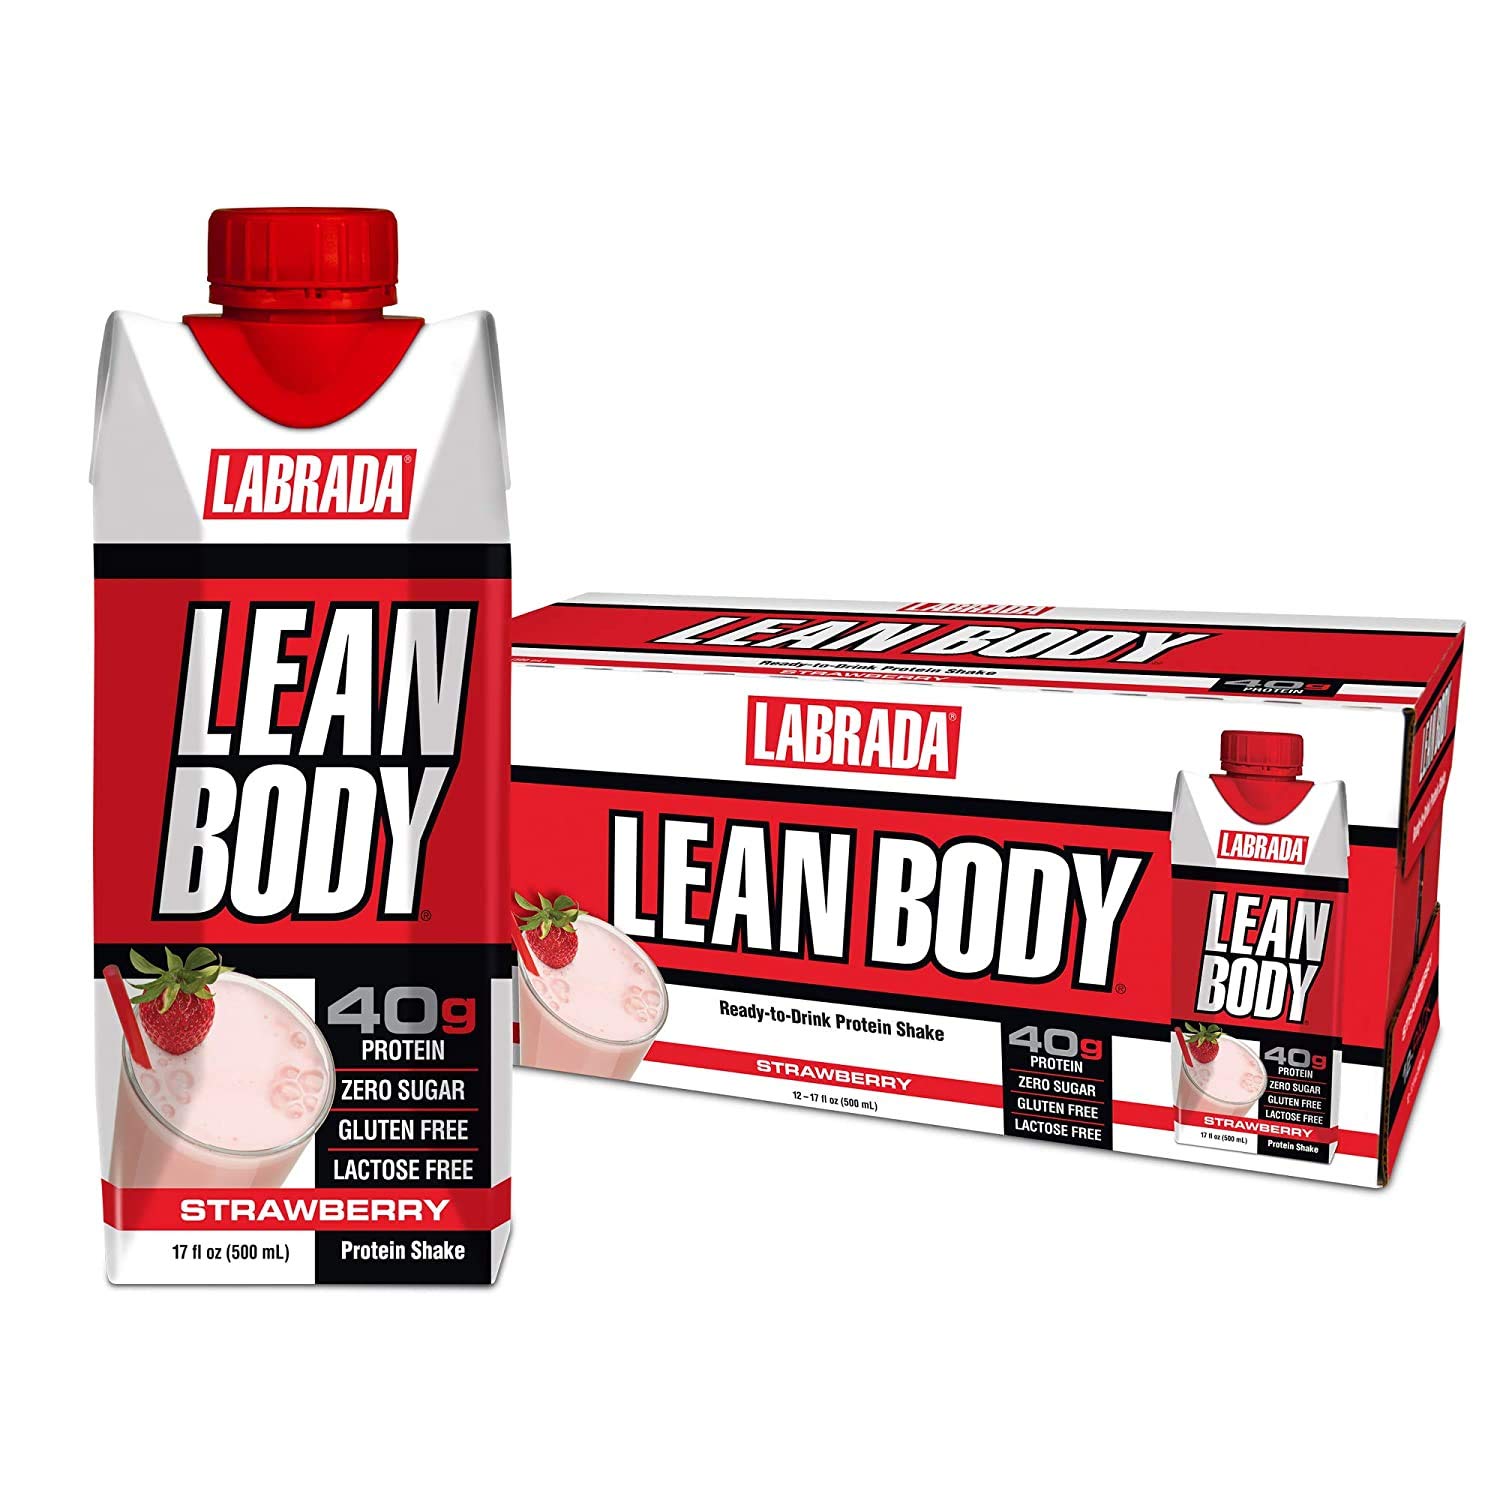 Lean Body Ready-to-Drink Strawberry Protein Shake, 40g Protein, Whey Blend, 0 Sugar, Gluten Free, 22 Vitamins & Minerals, 17 Ounce (Recyclable Carton & Lid - Pack of 12) LABRADA